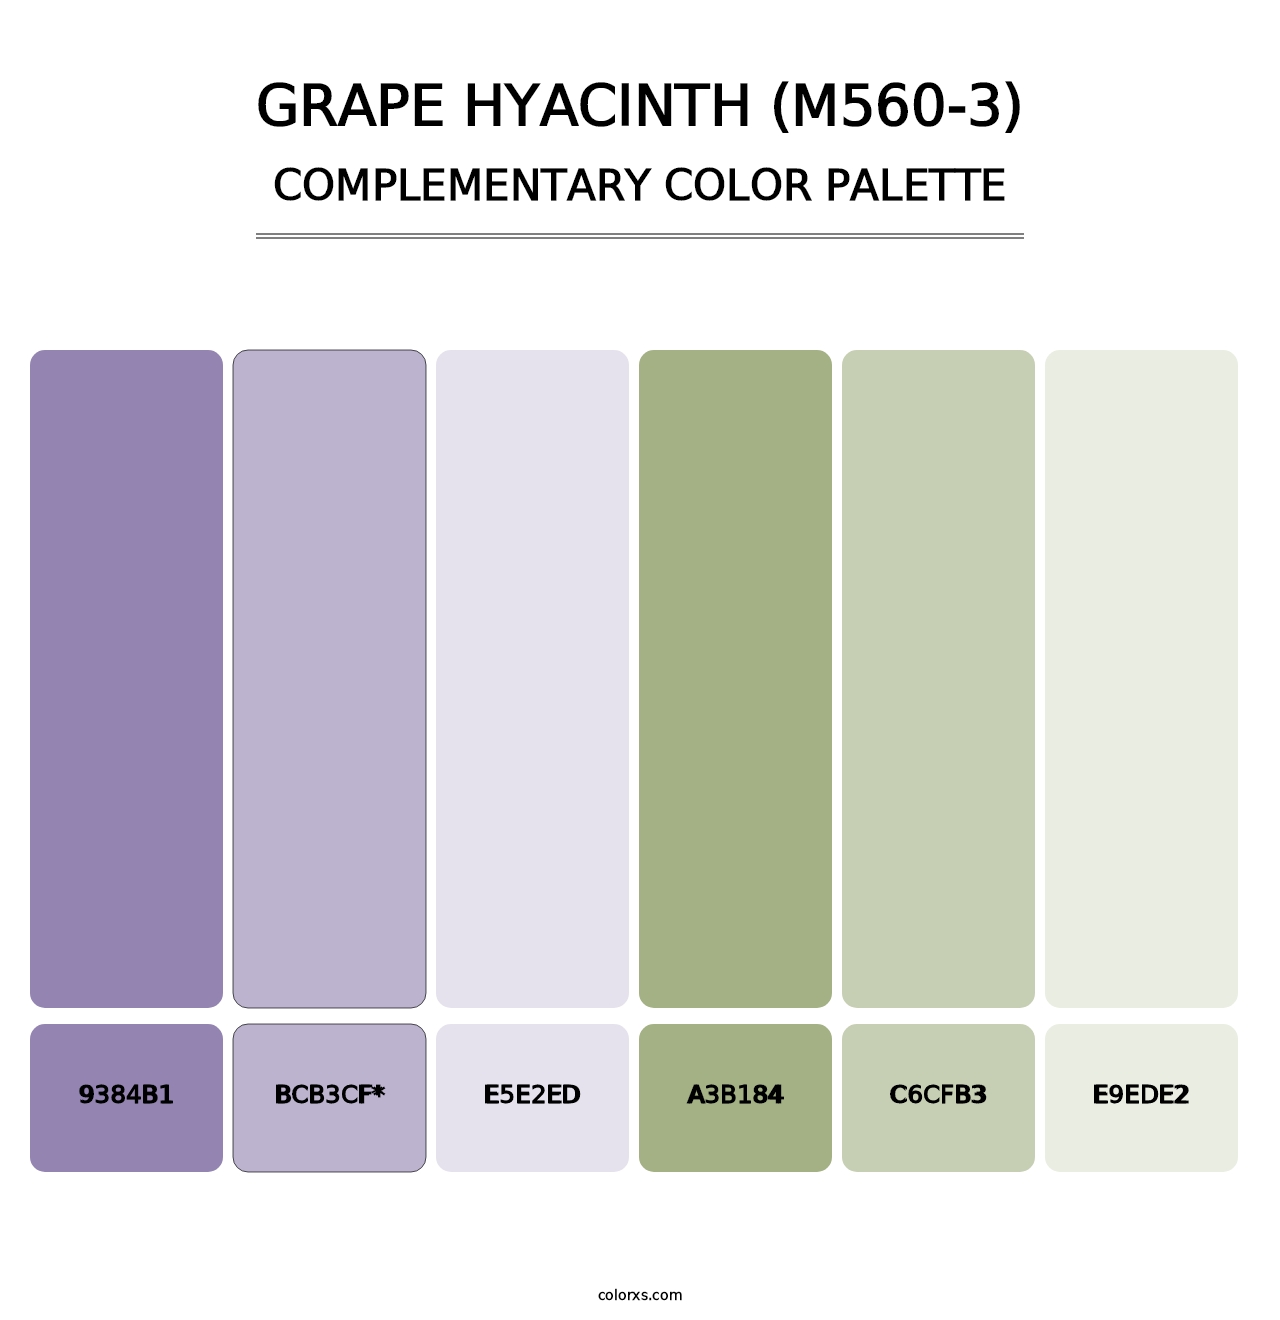 Grape Hyacinth (M560-3) - Complementary Color Palette